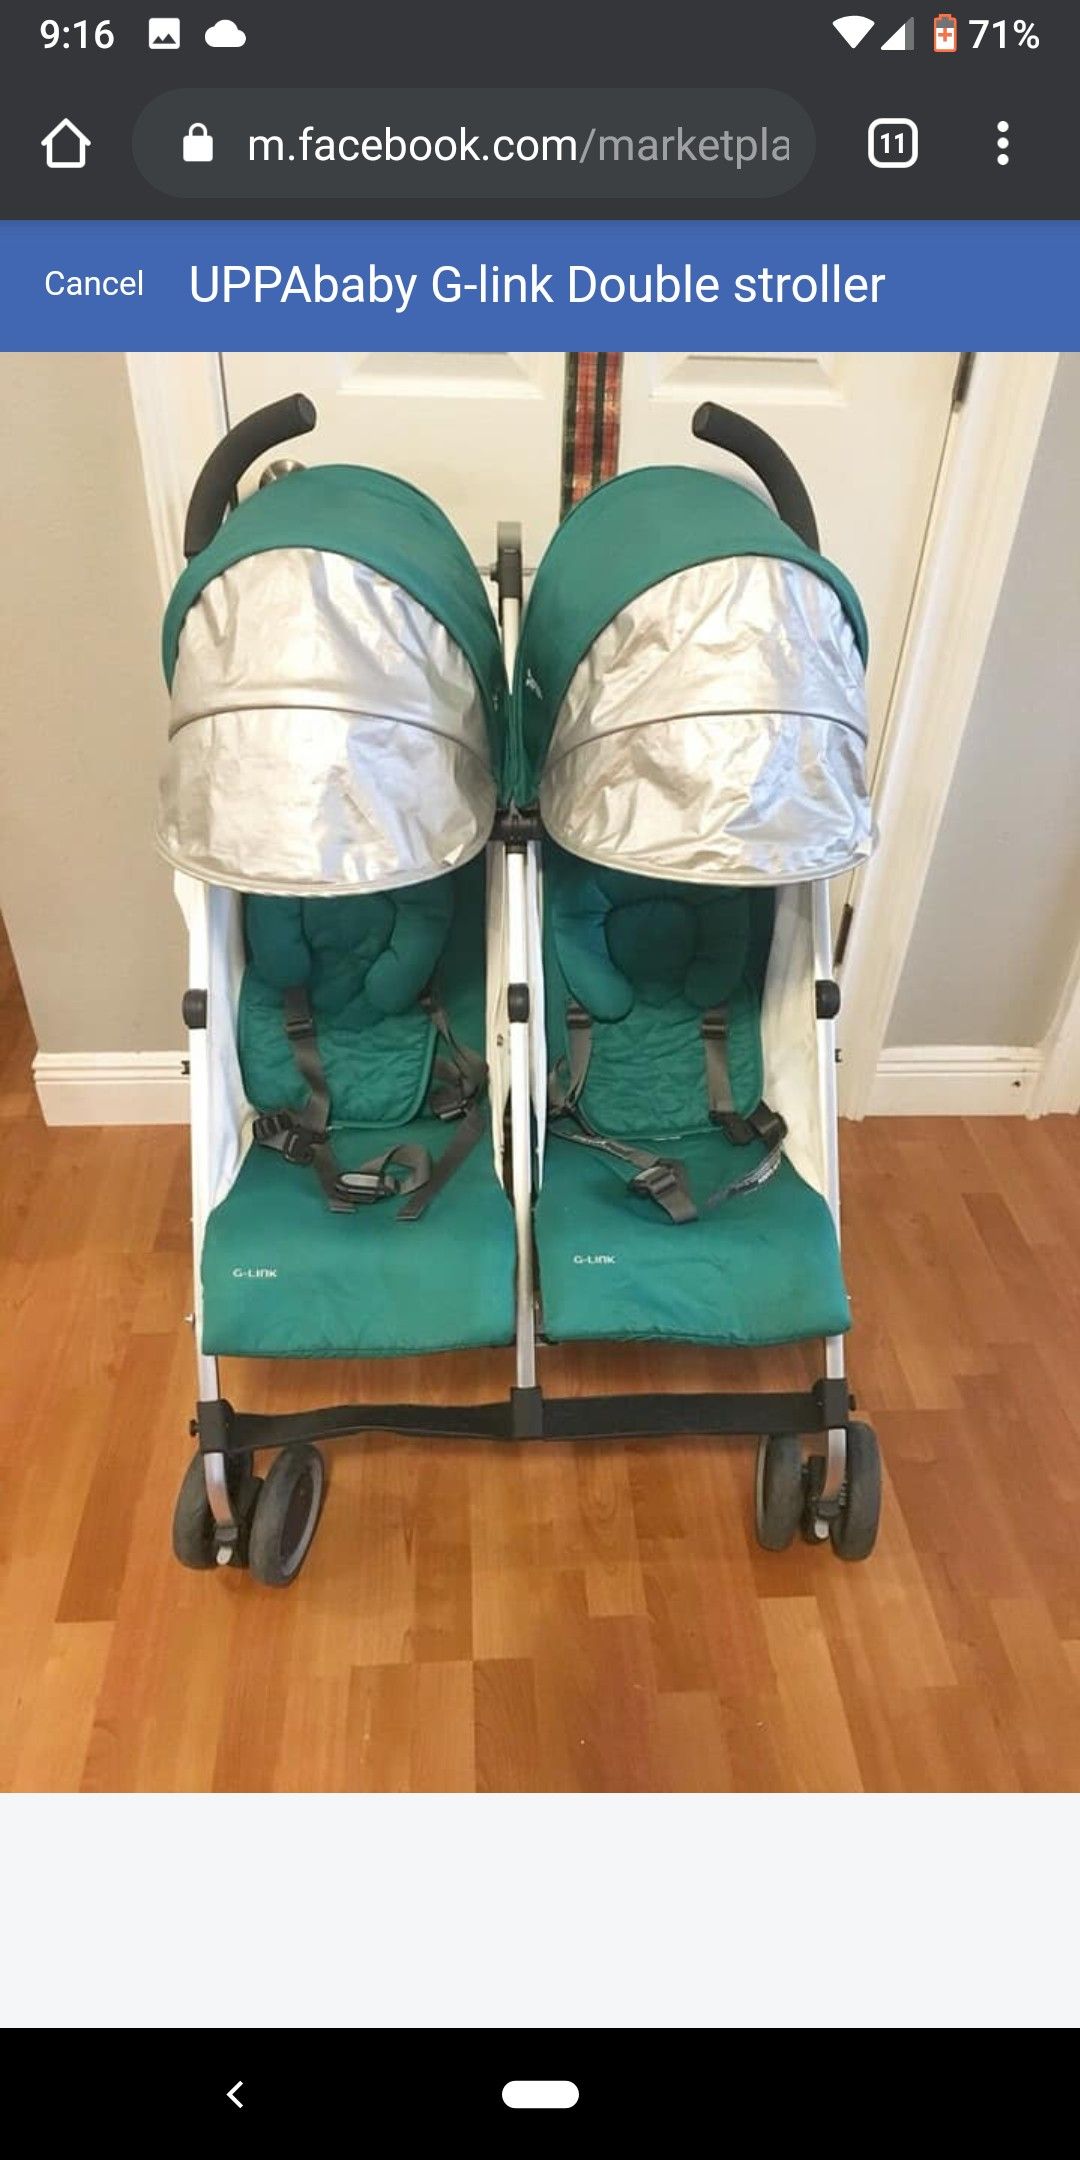 UPPAbaby G-link Double stroller